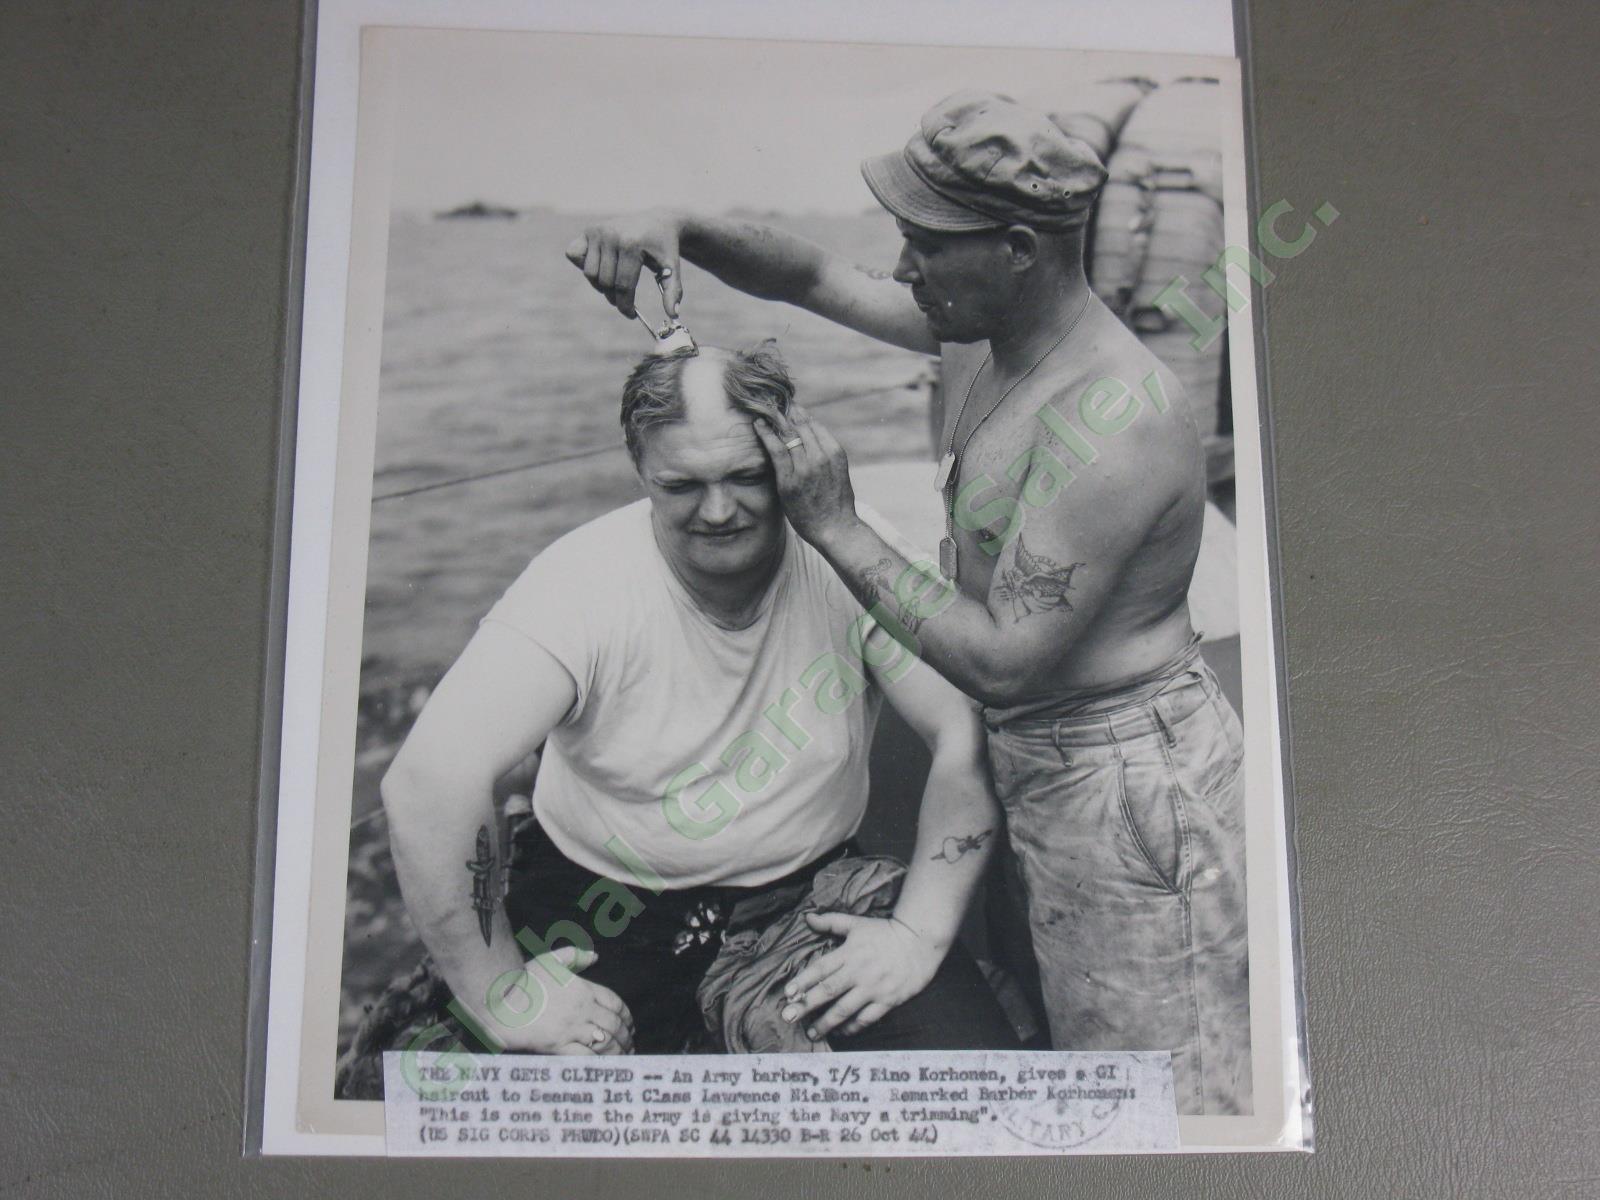 93 Rare WWII US Army Press Photo Lot Island Combat Philippines Pacific Theater 7